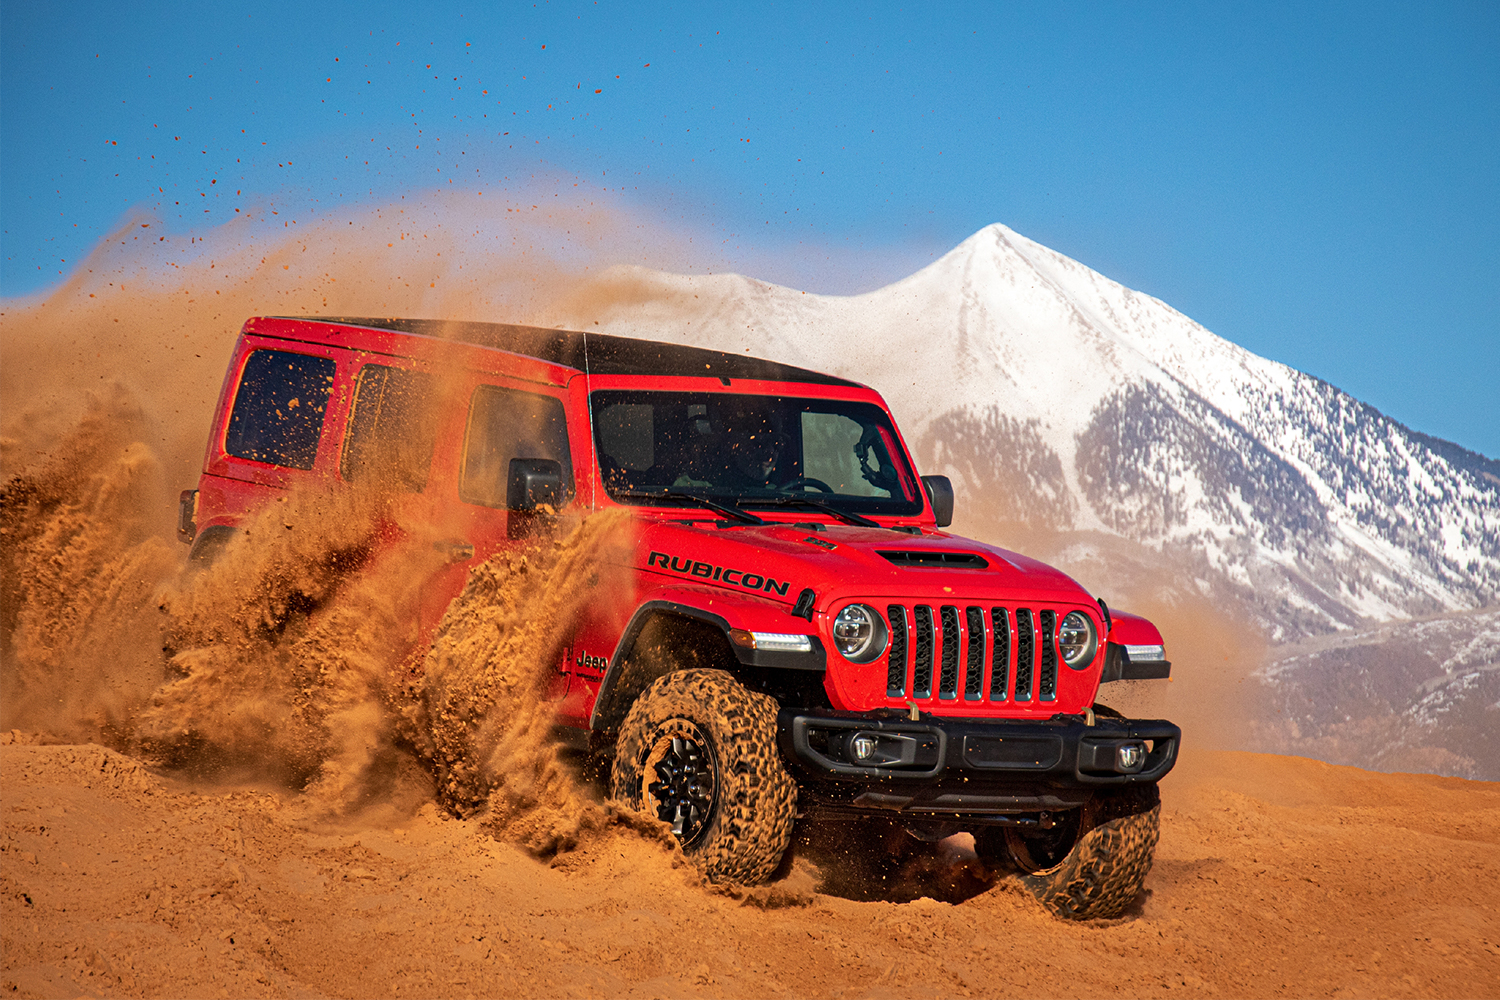 A red Jeep Wrangler Rubicon 392, the first-ever Wrangler with a V8 engine, churning up sand dunes in front of a snow-capped mountain